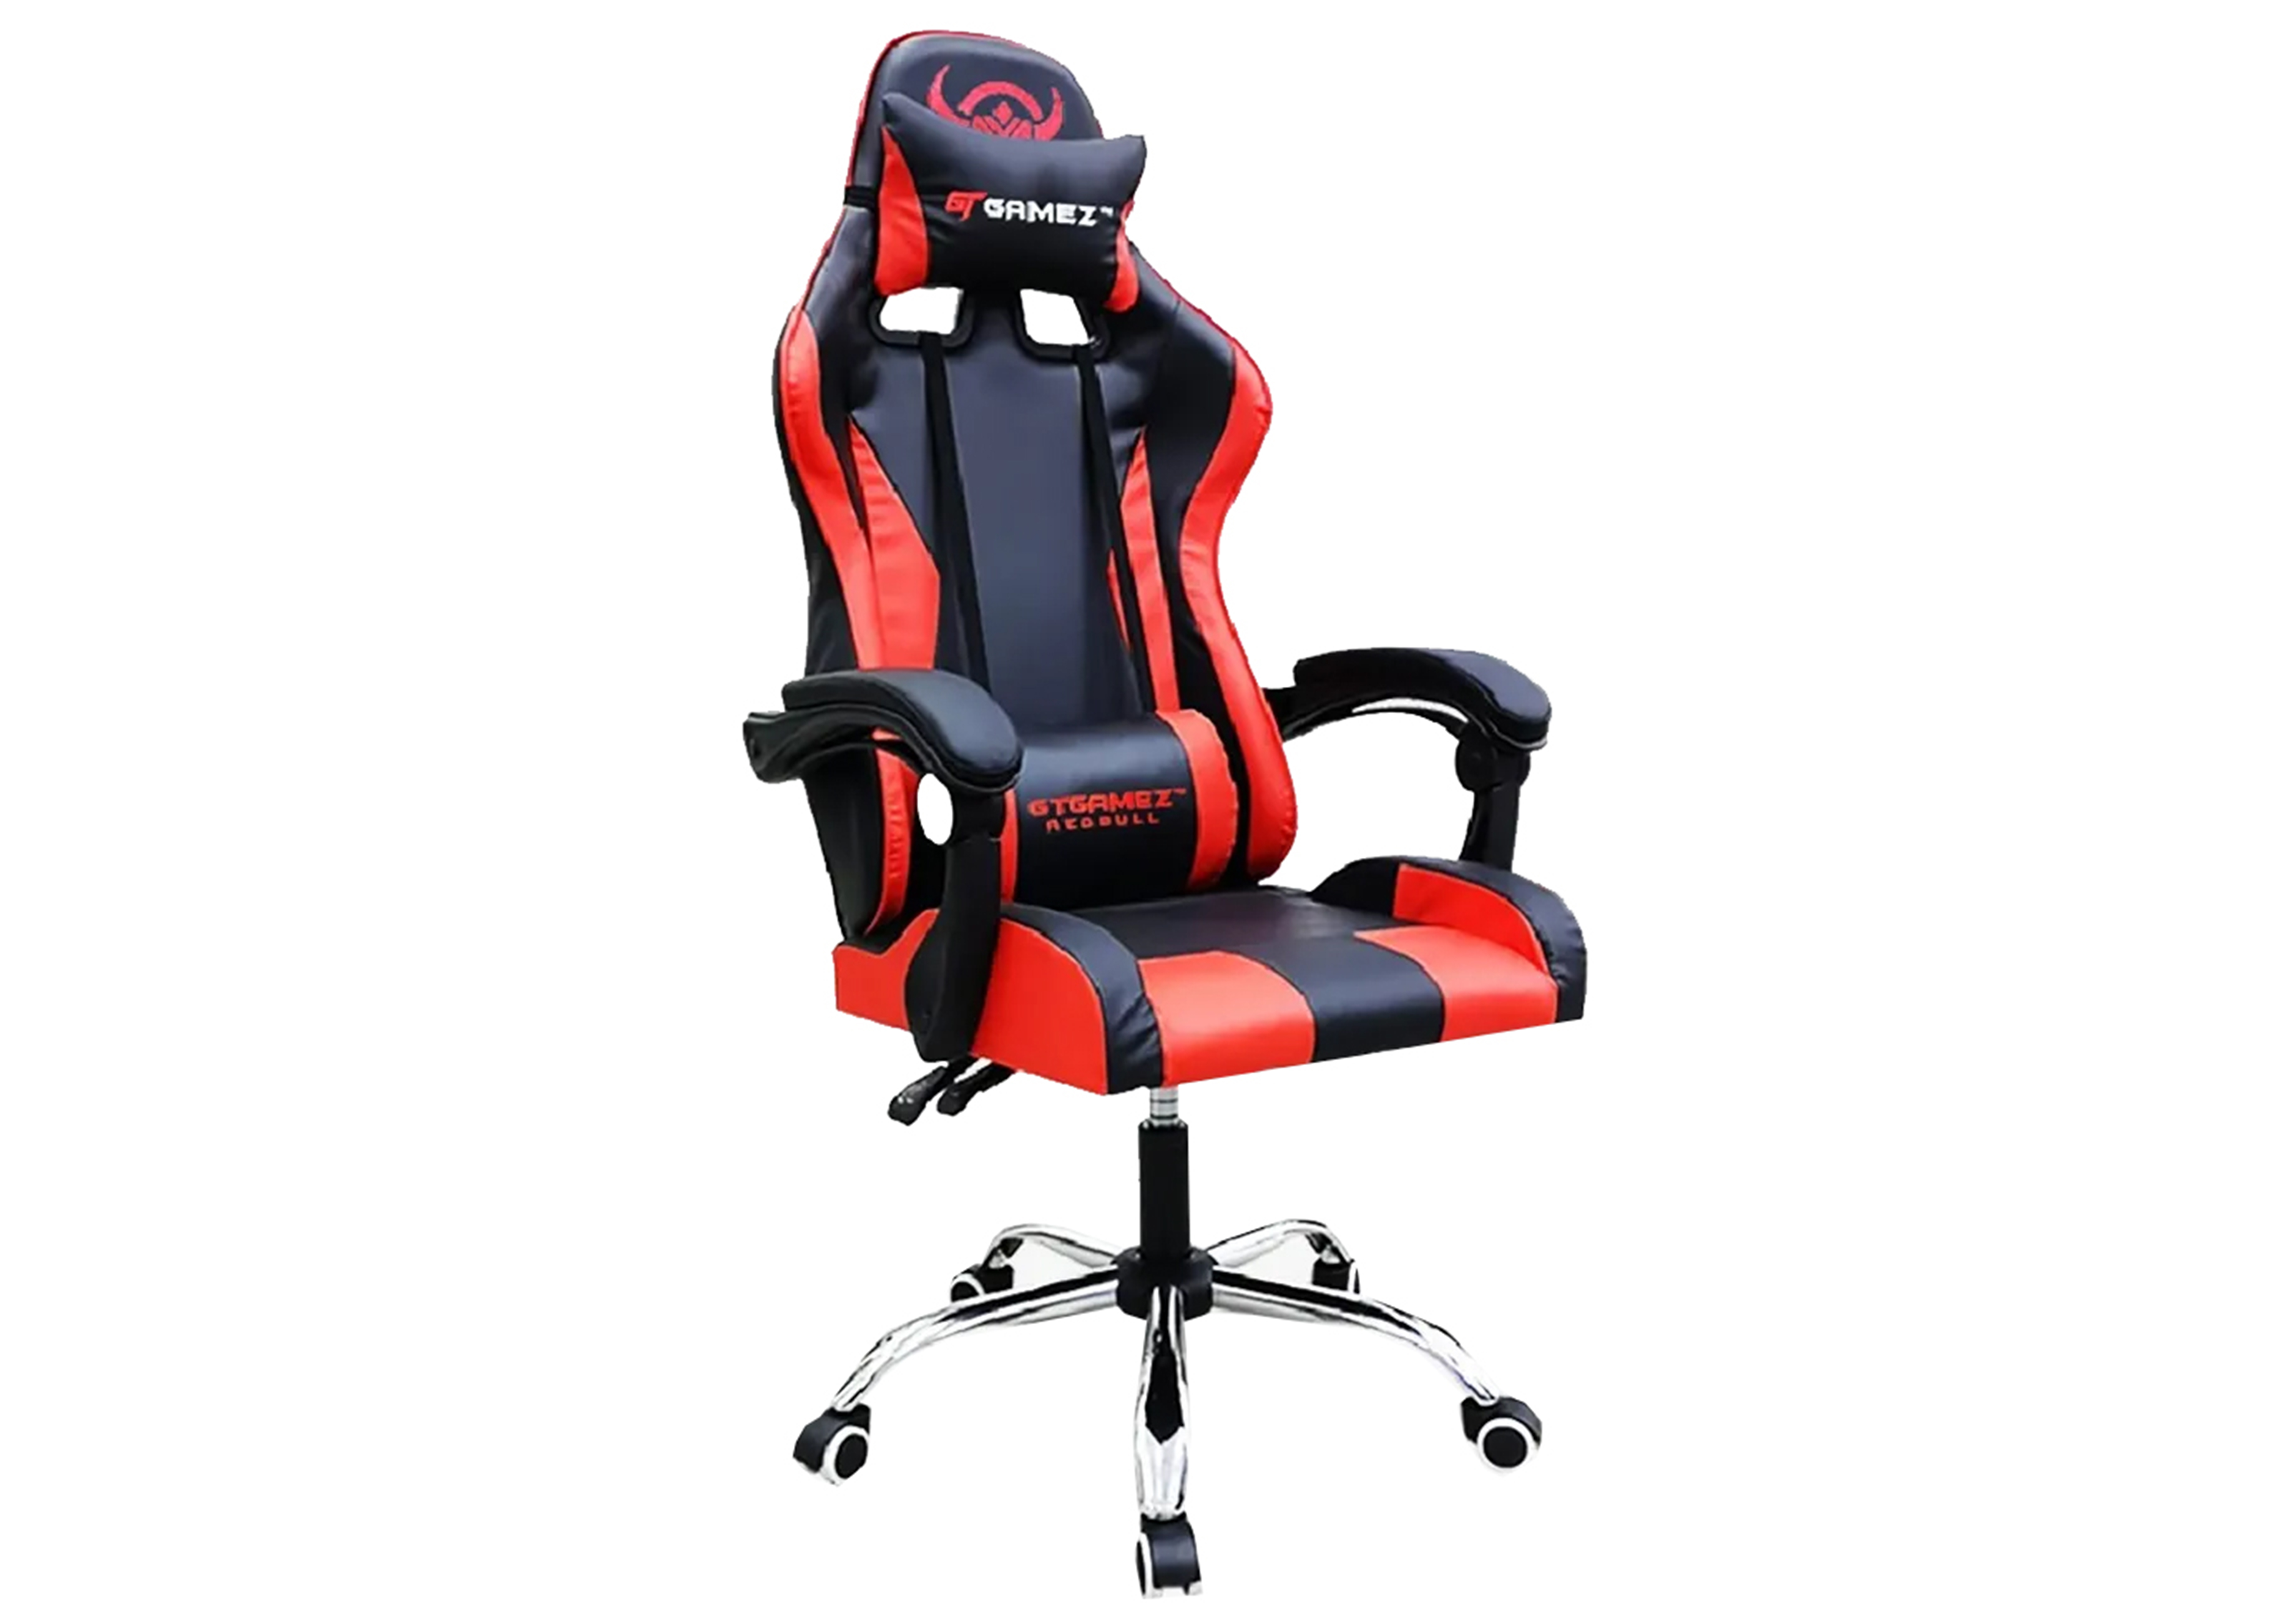 Ergonomic Soft and Comfy Height Adjustable E-Sports Gaming Chair - Red